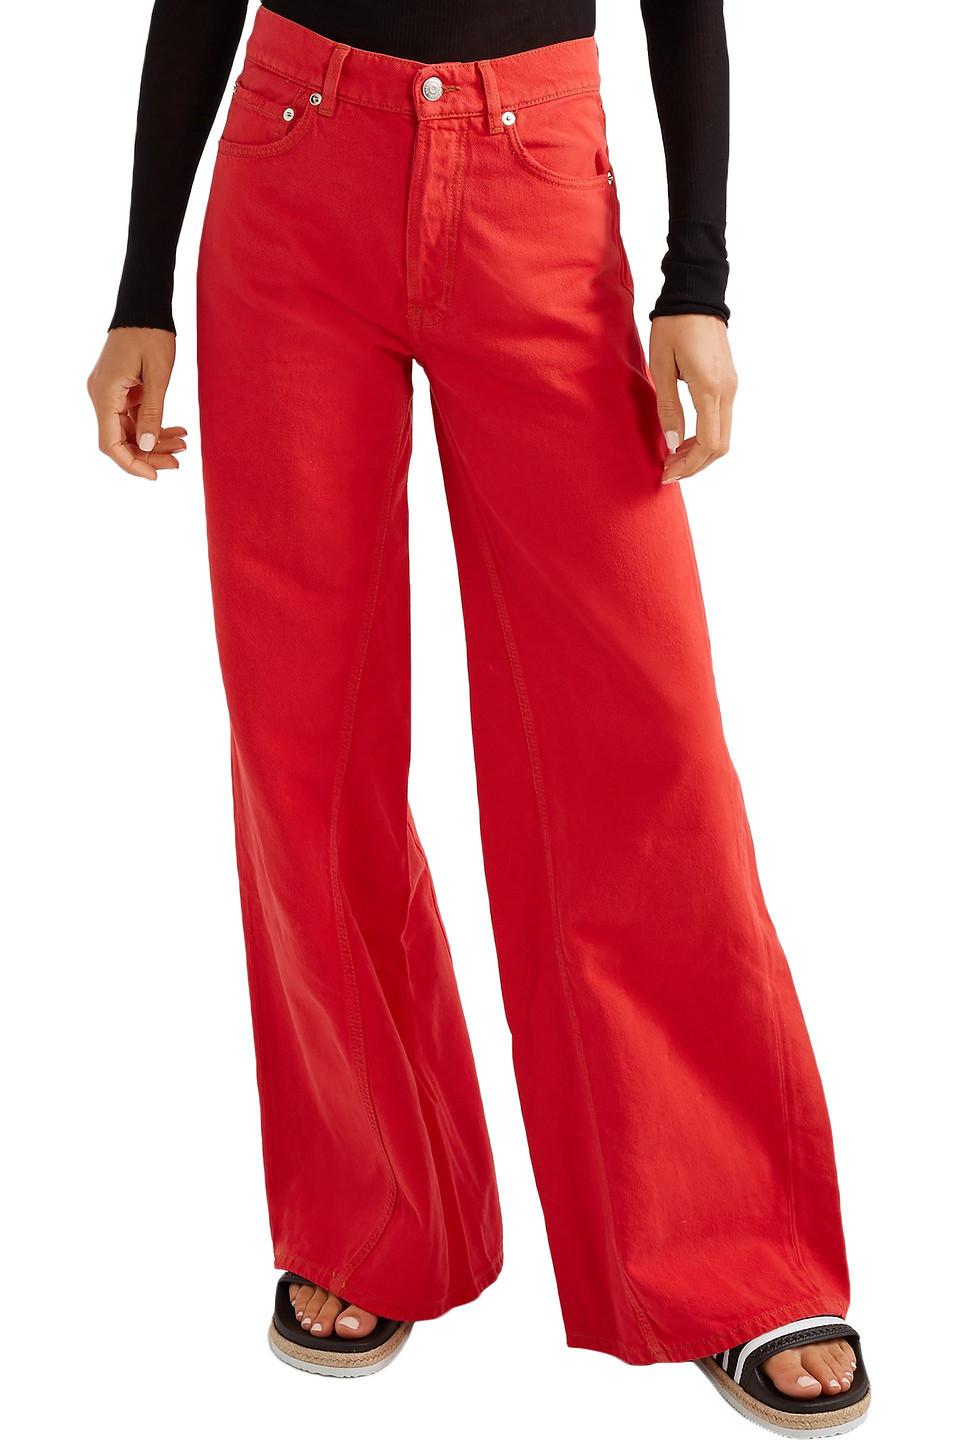 Ganni High-rise Wide-leg Jeans in Red | Lyst